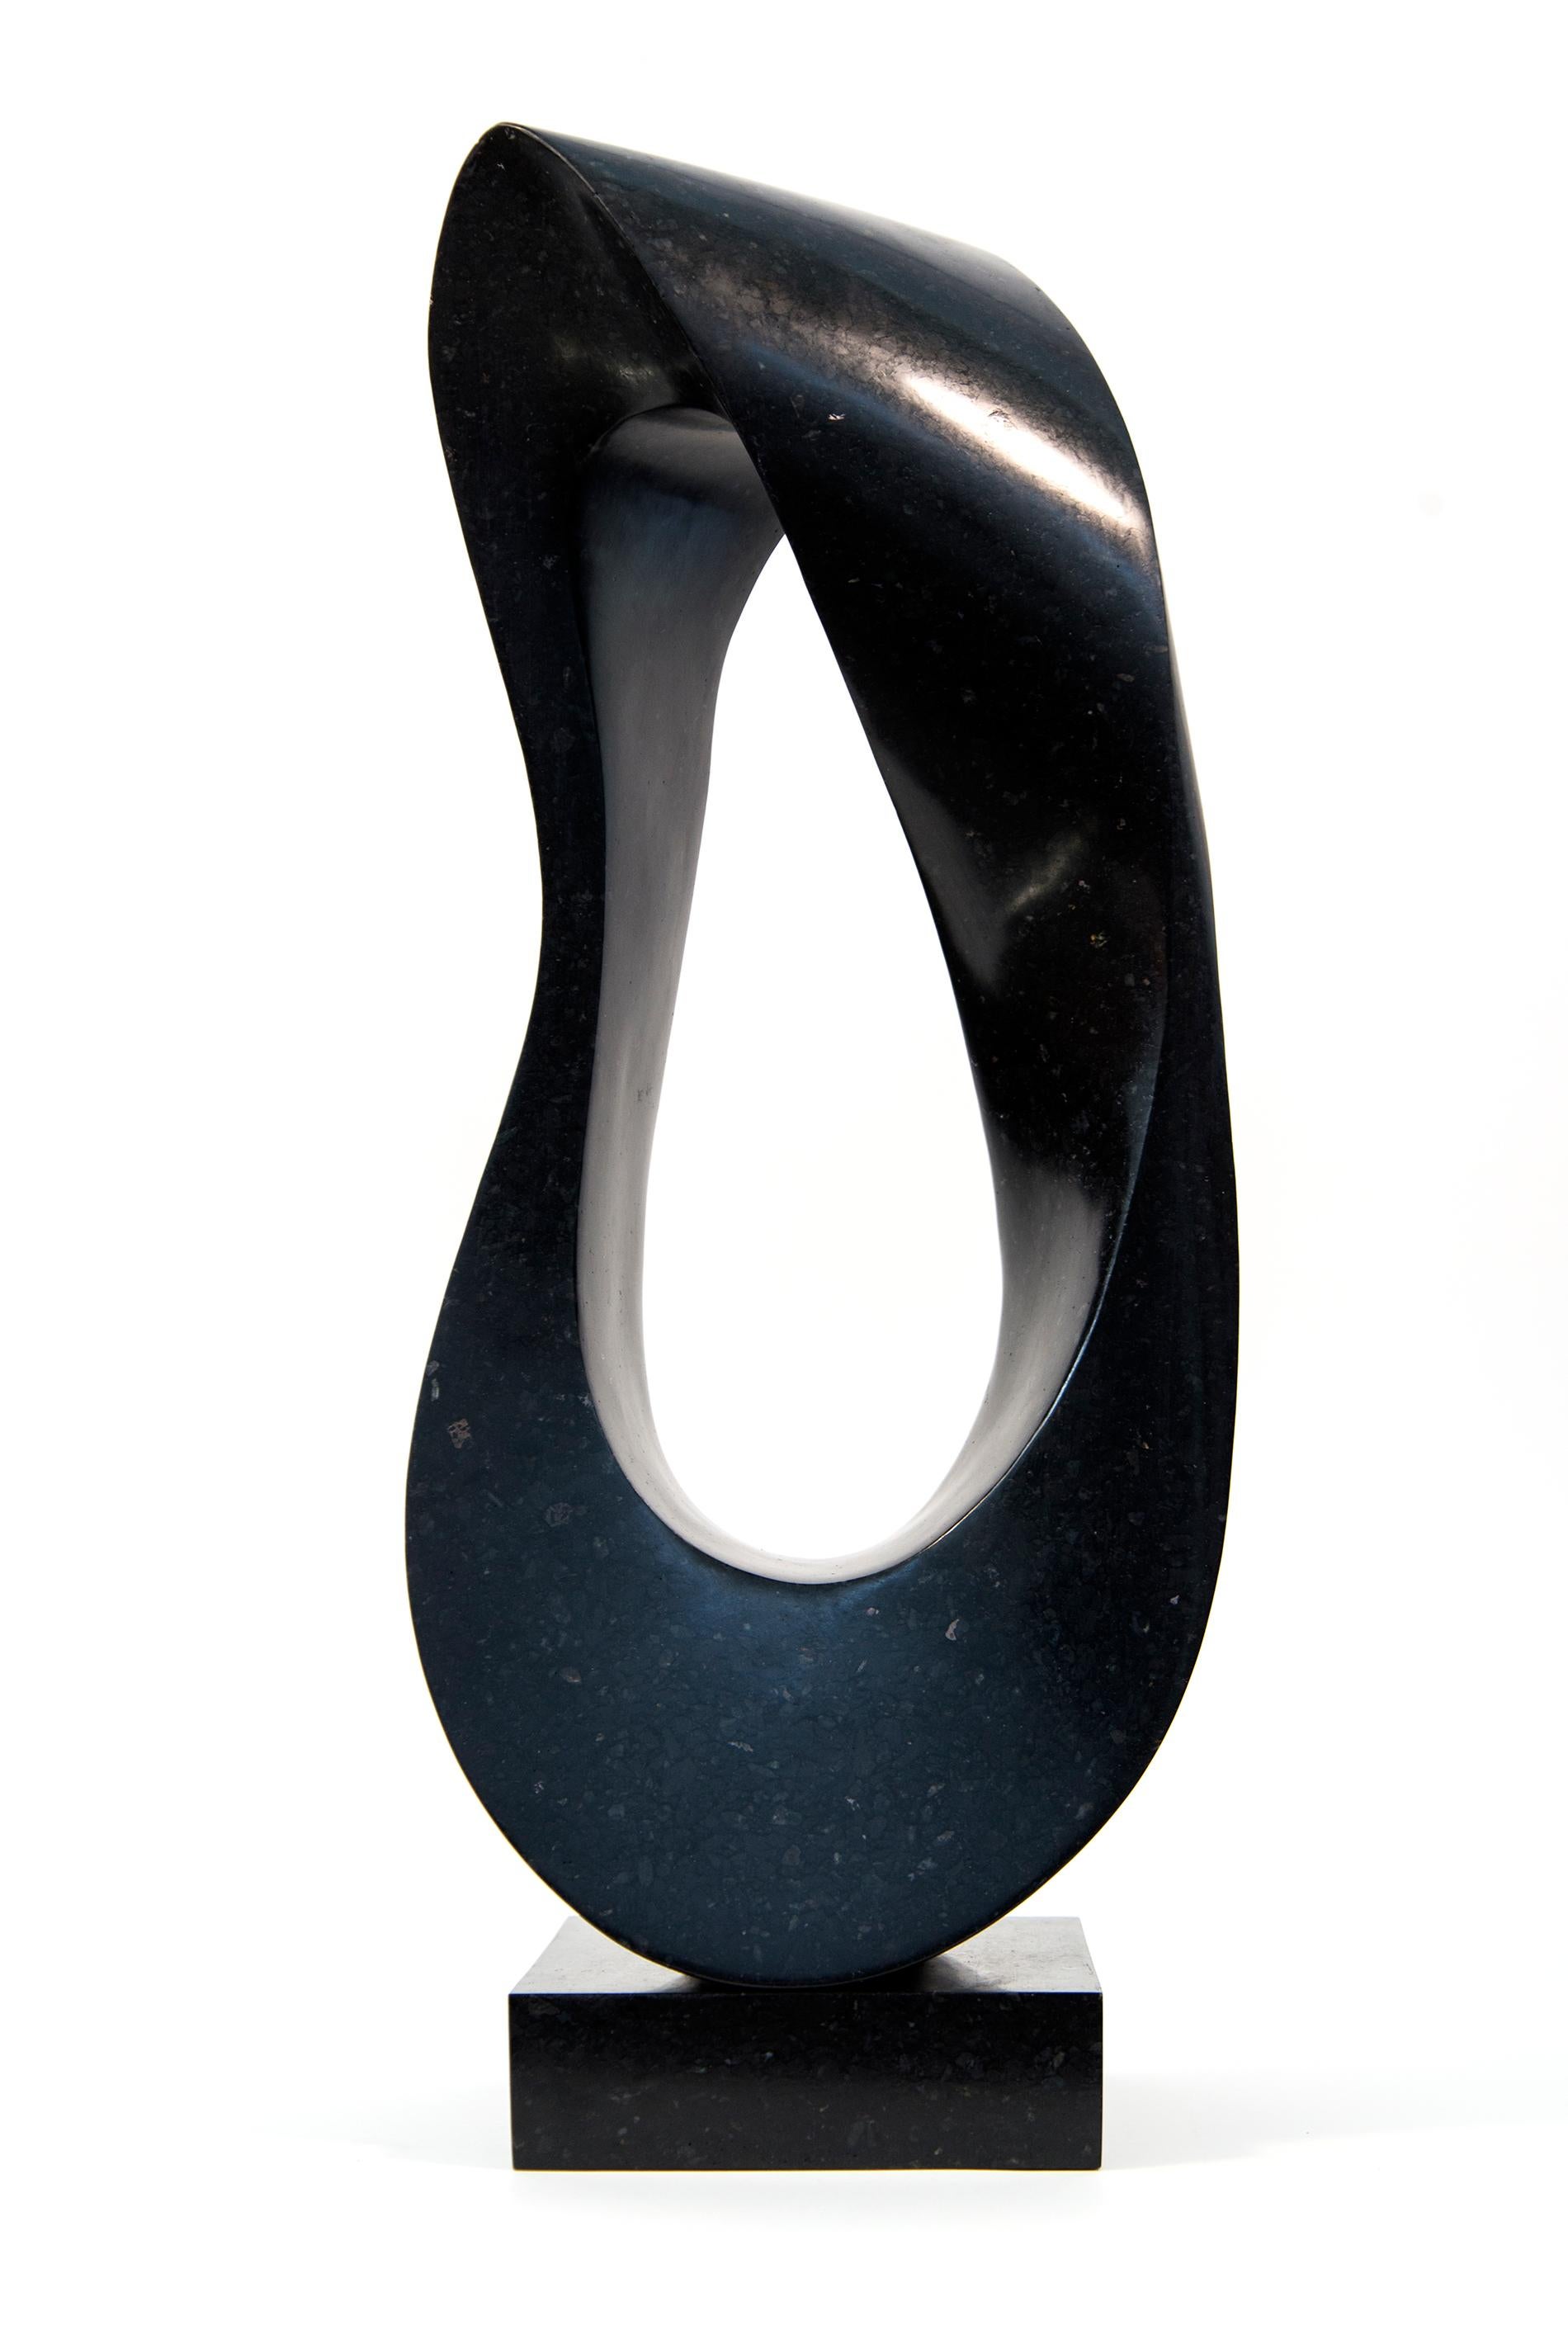 Mobius Minor 1/50 - dark, smooth, polished, abstract, black granite sculpture For Sale 7